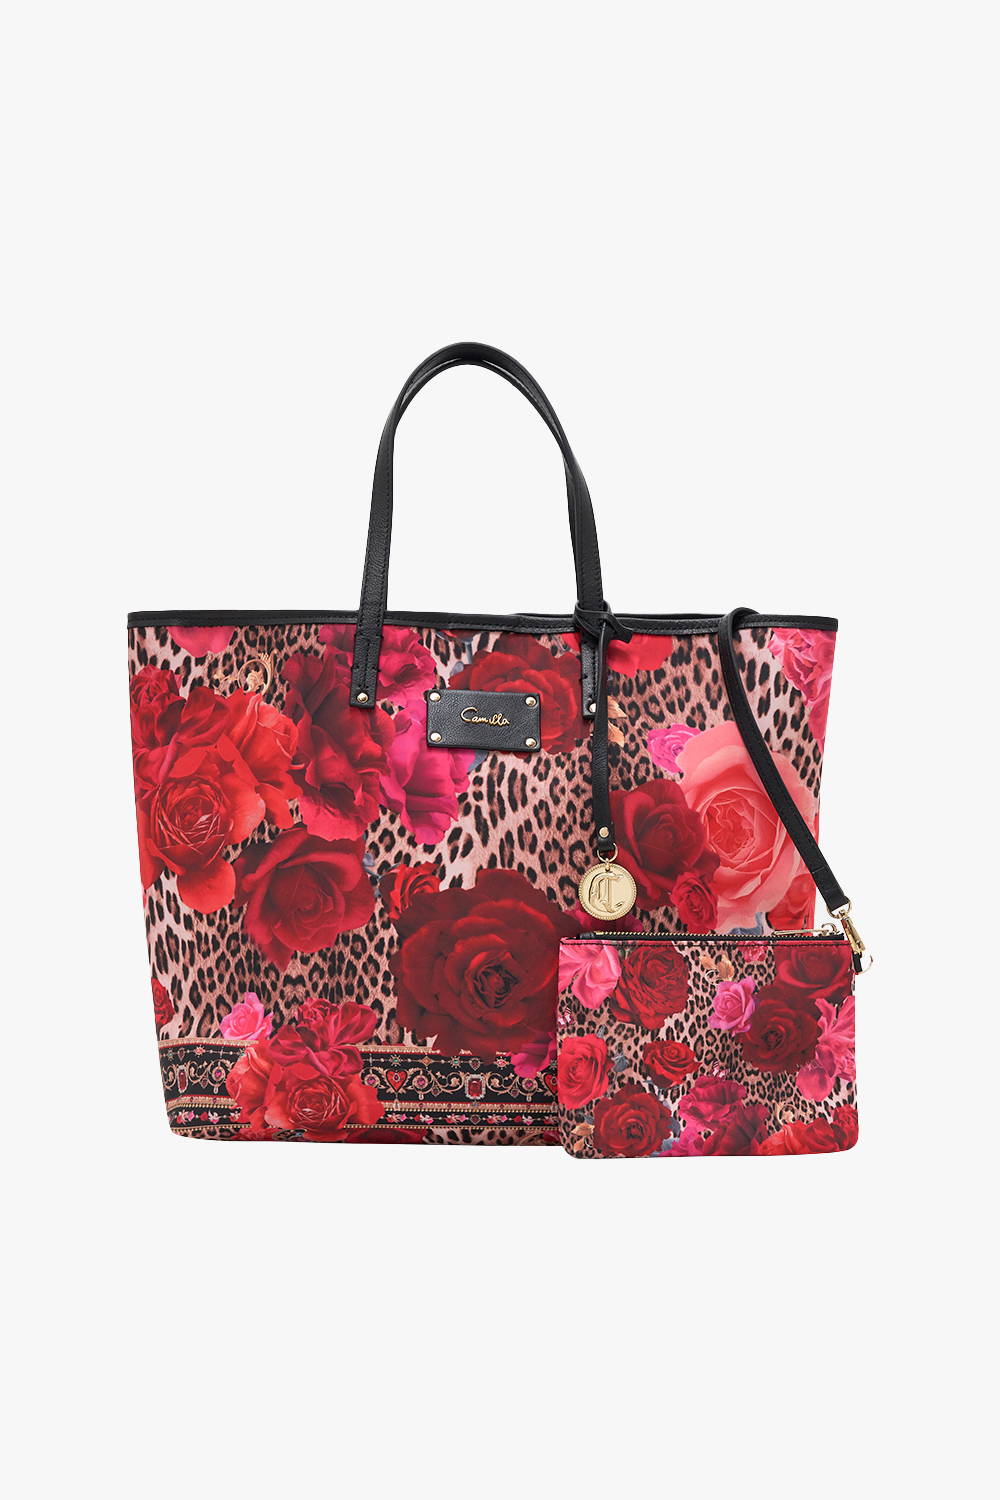 CAMILLA RED FLORAL PRINT TOTE BAG AND SMALL PURSE